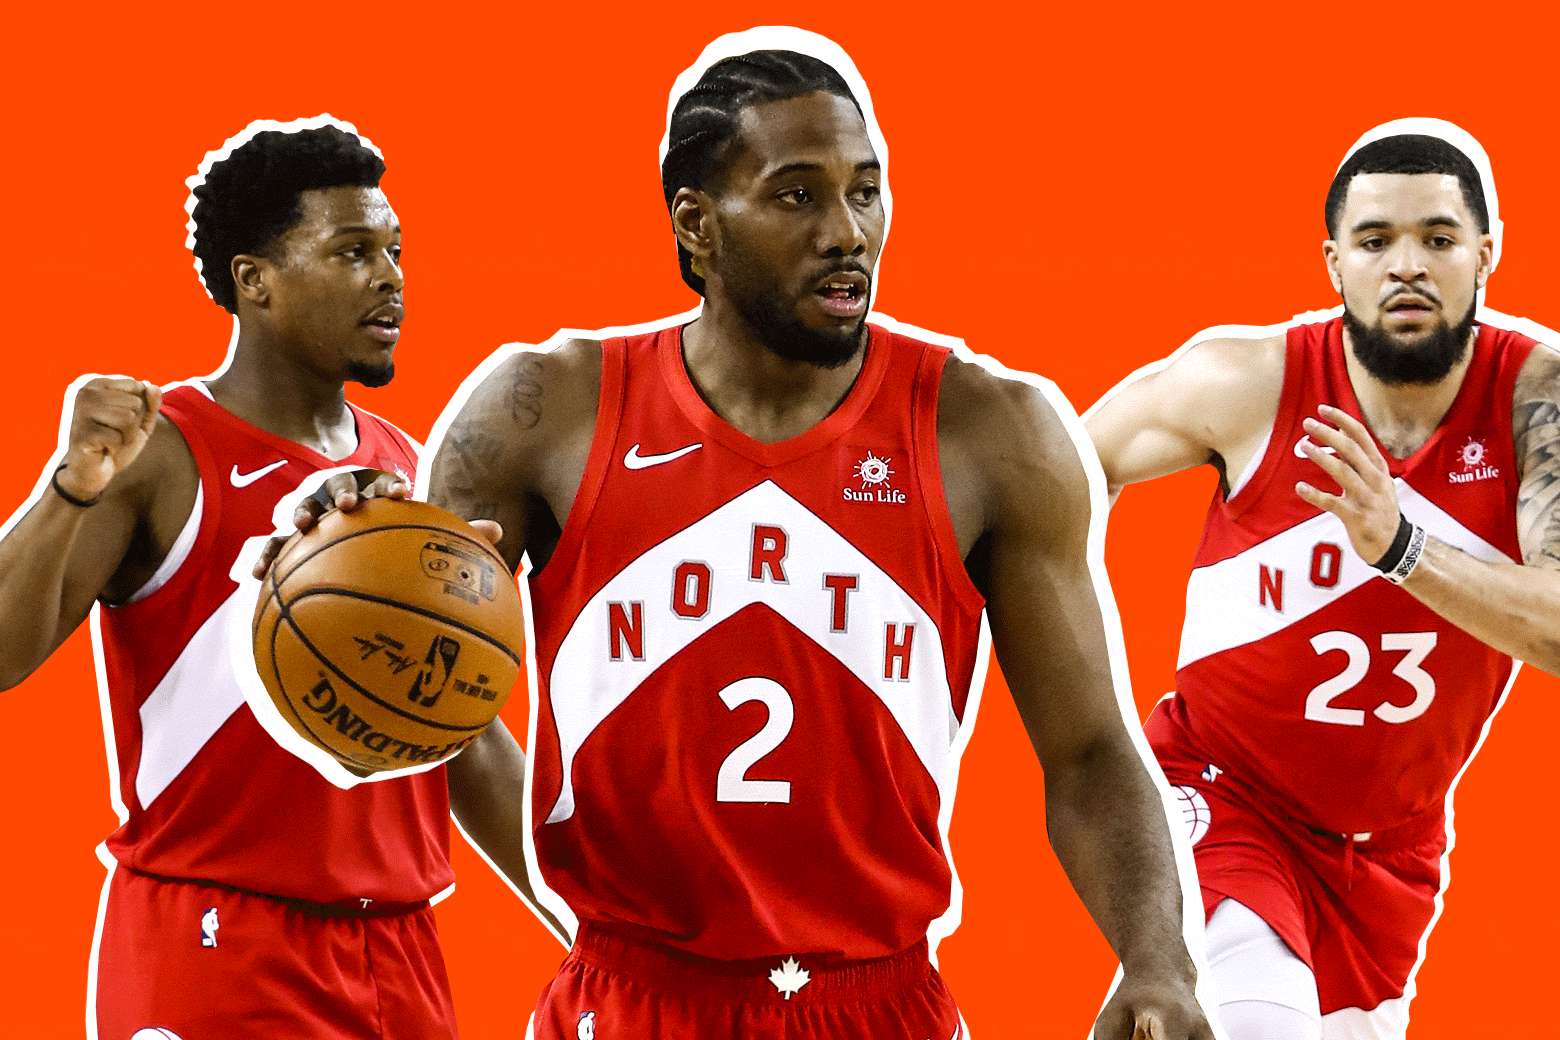 Raptors crowned NBA champions for first time in team history